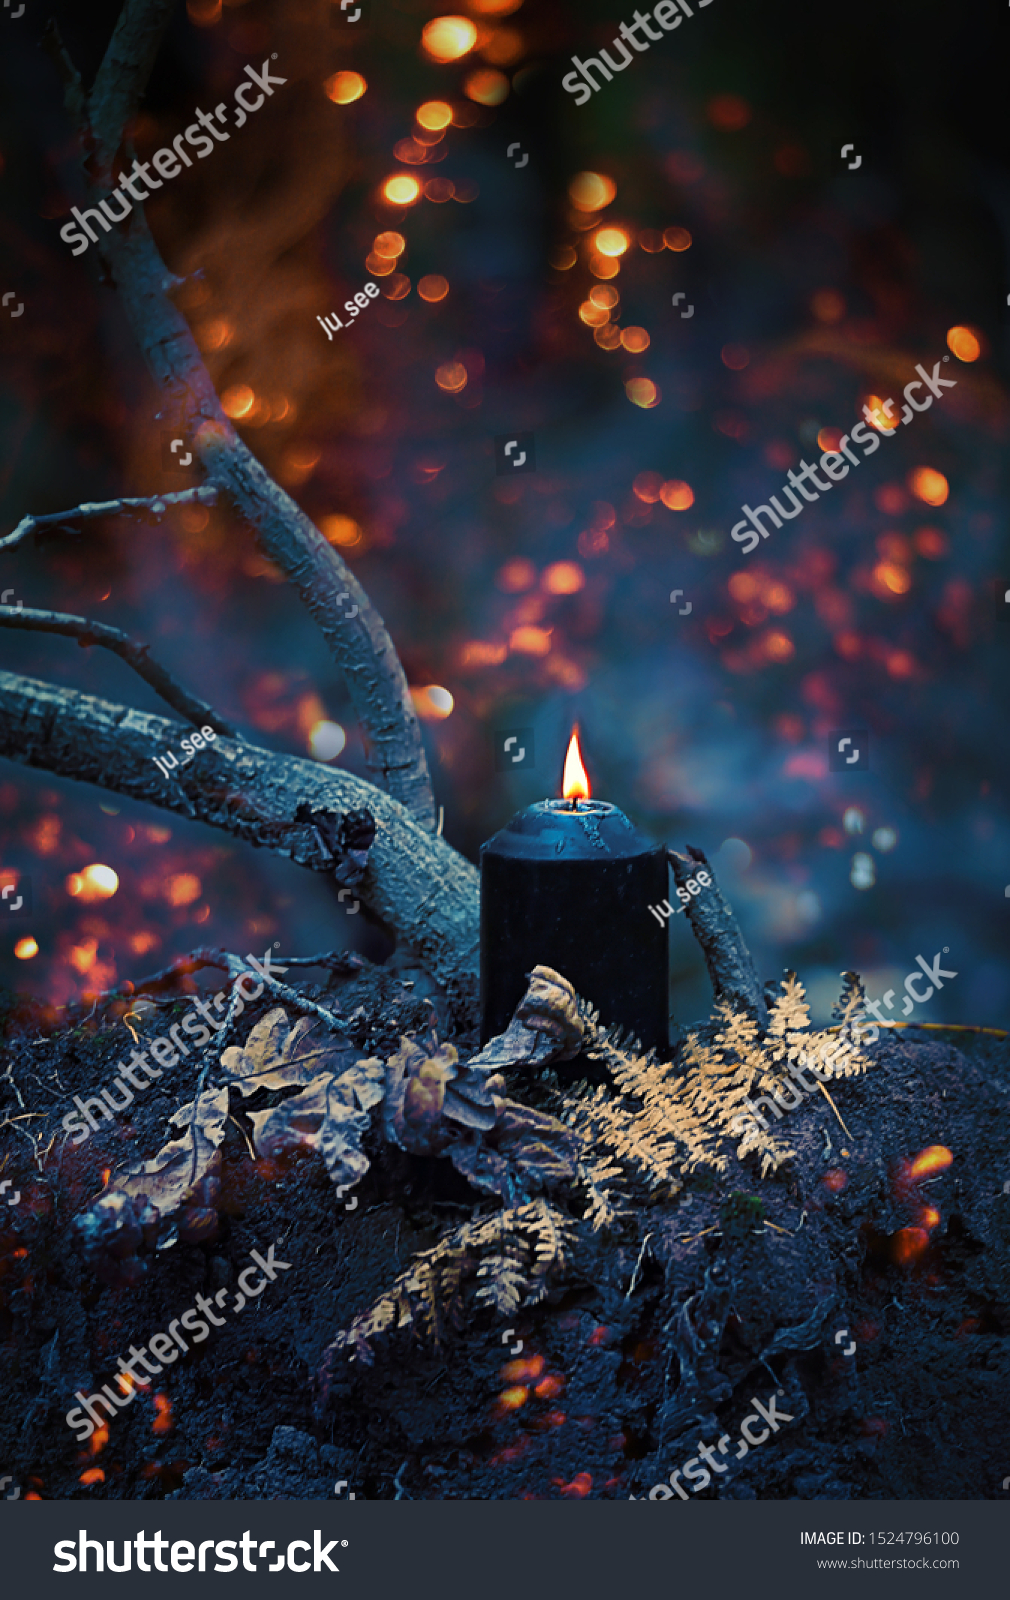 magic black candle in mystery dark autumn forest, abstract natural background. fairy scene. witchcraft ritual. Fall season. Mabon, Samhain sabbat, Halloween holiday concept. template for design #1524796100